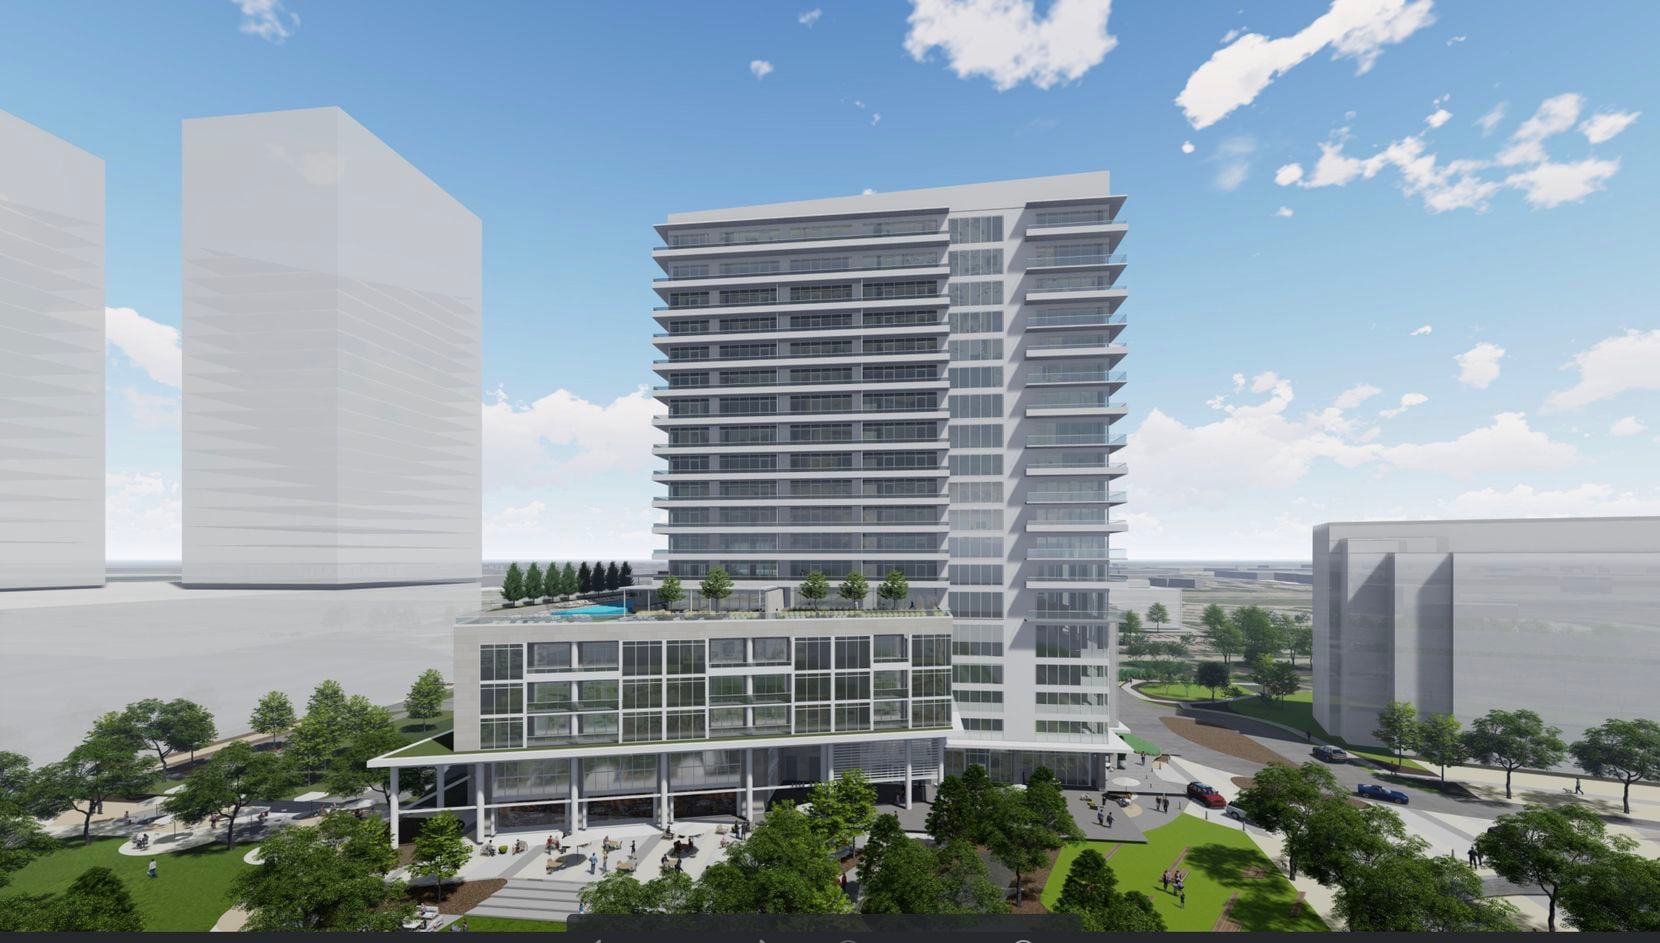 The mixed-use development includes a 19-story apartment tower.